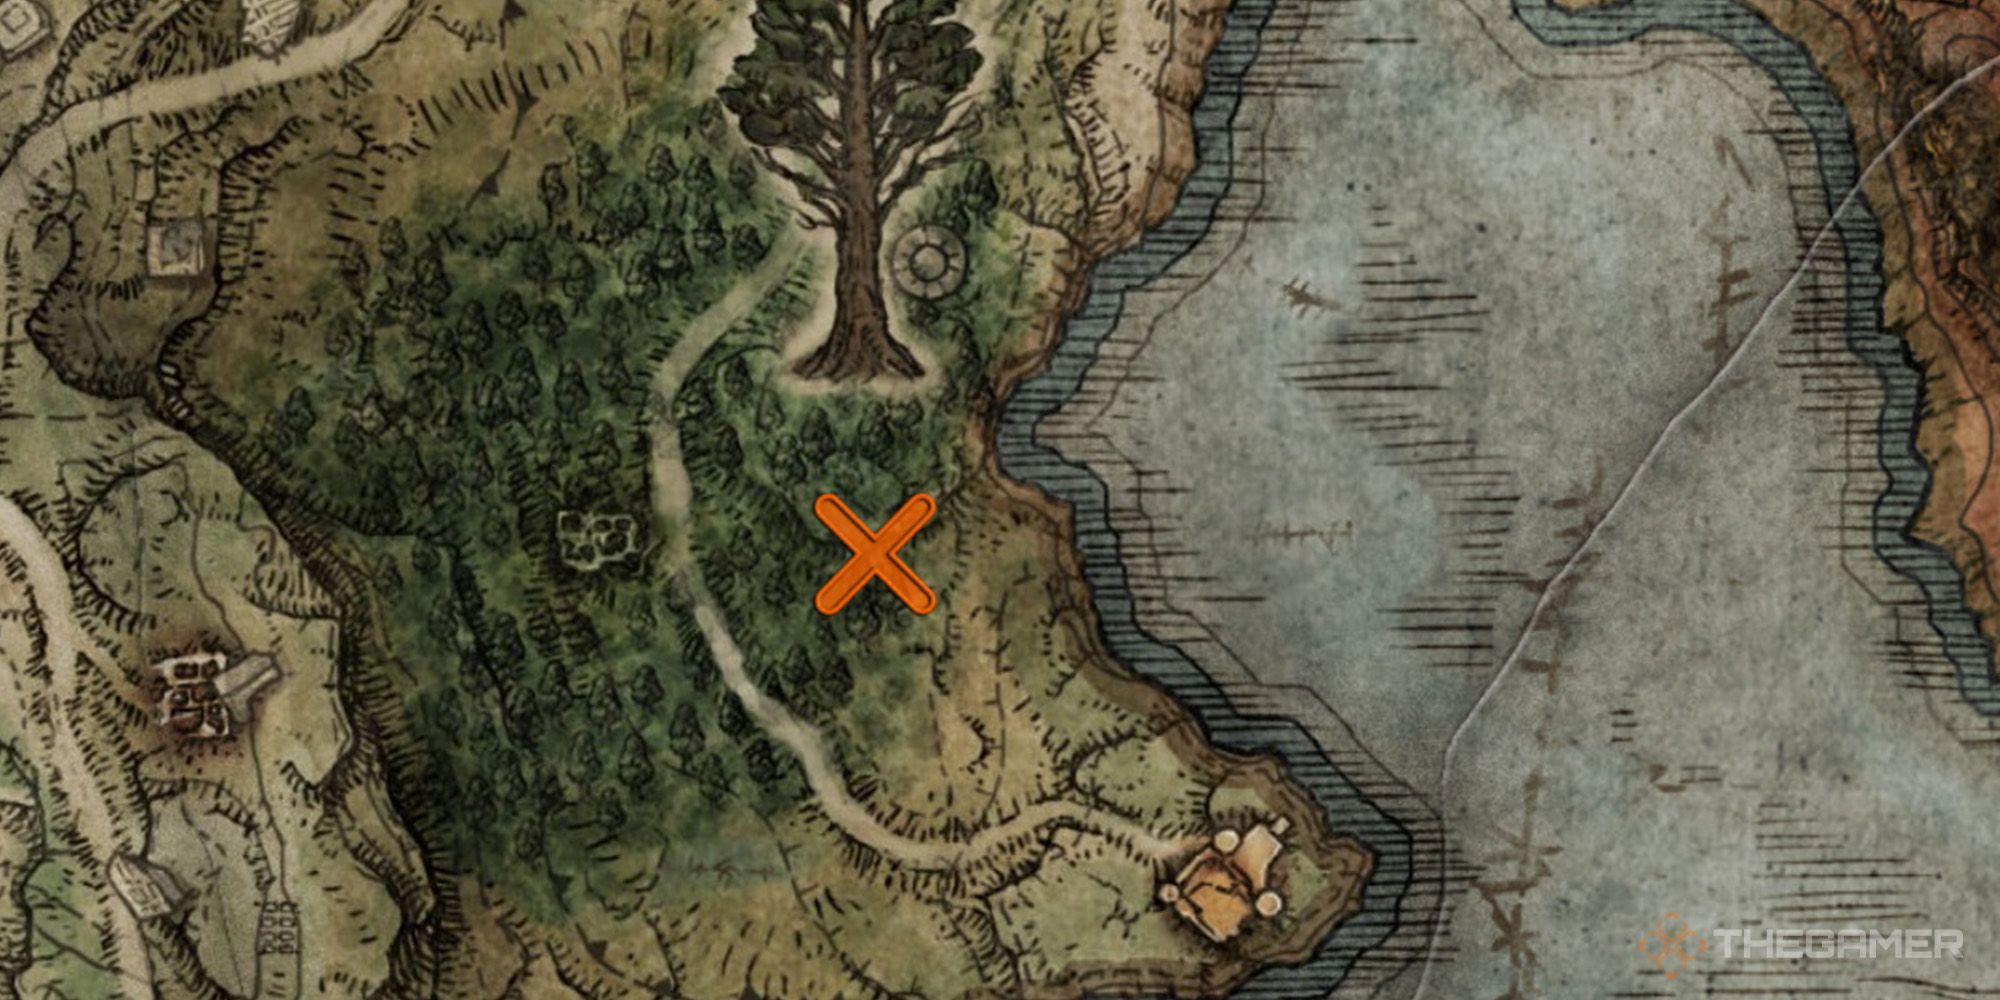 Elden Ring Map showing the location of Armorer's Cookbook [3]